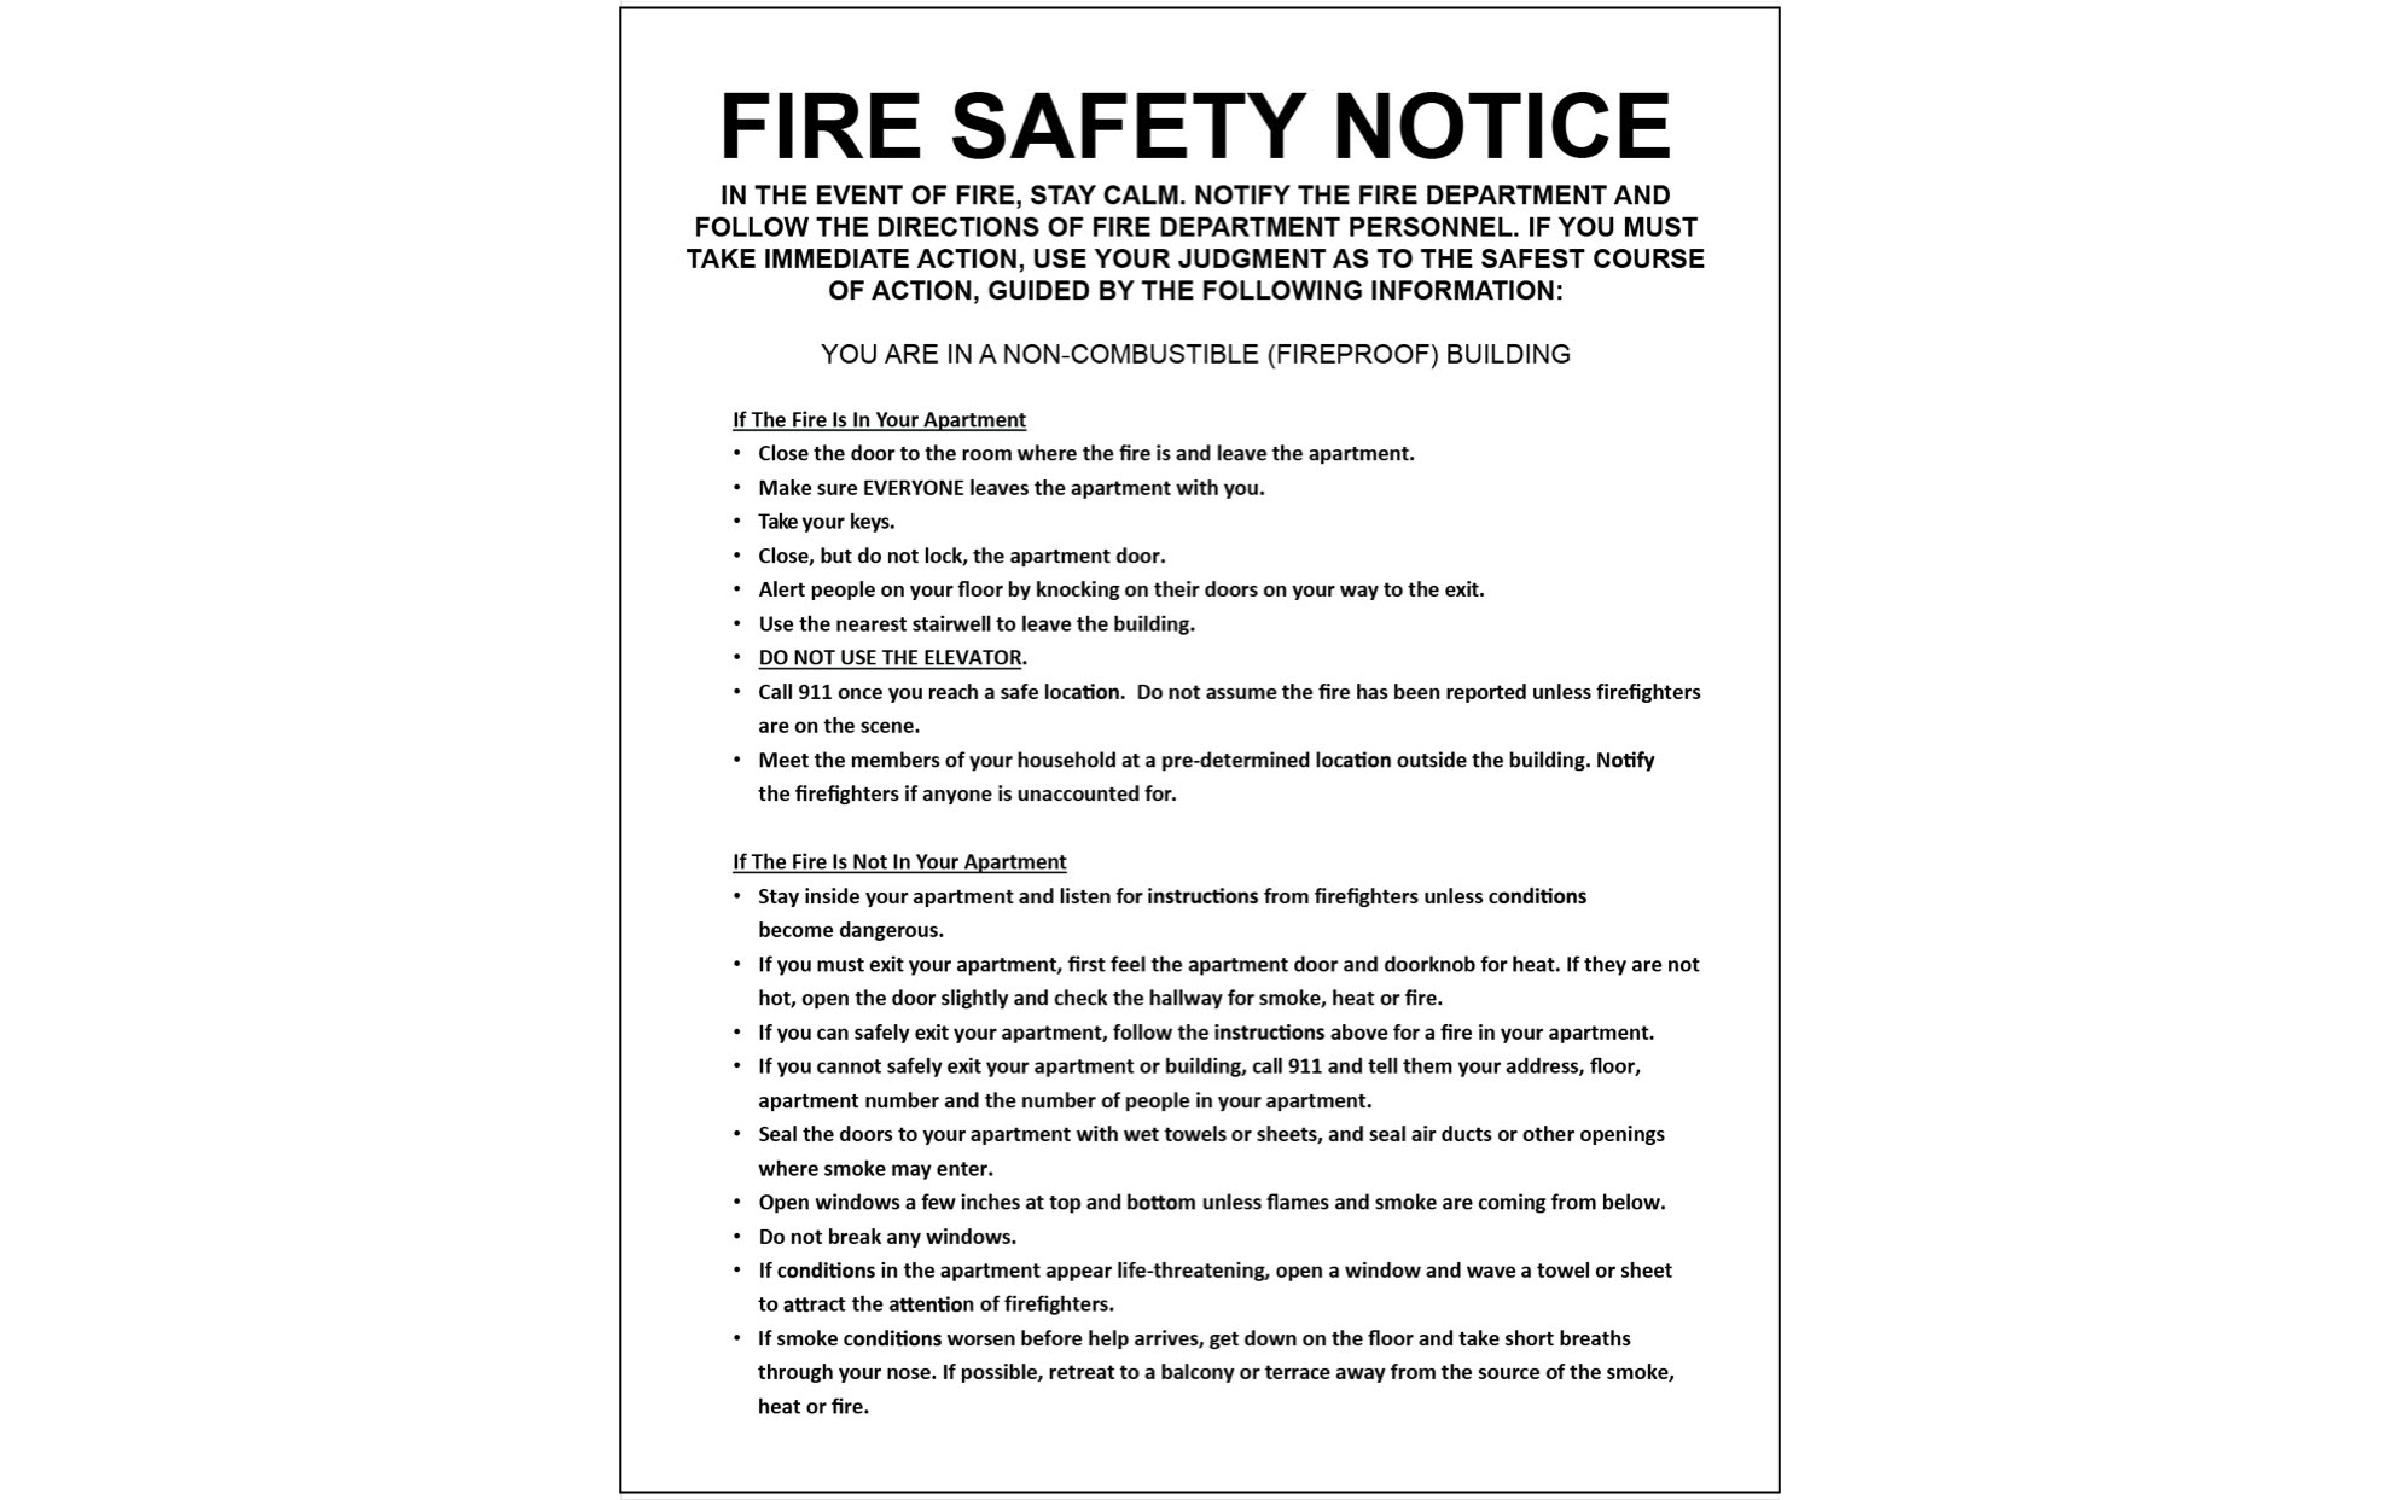 Sign 6) NON-COMBUSTIBLE Fire Safety Notice